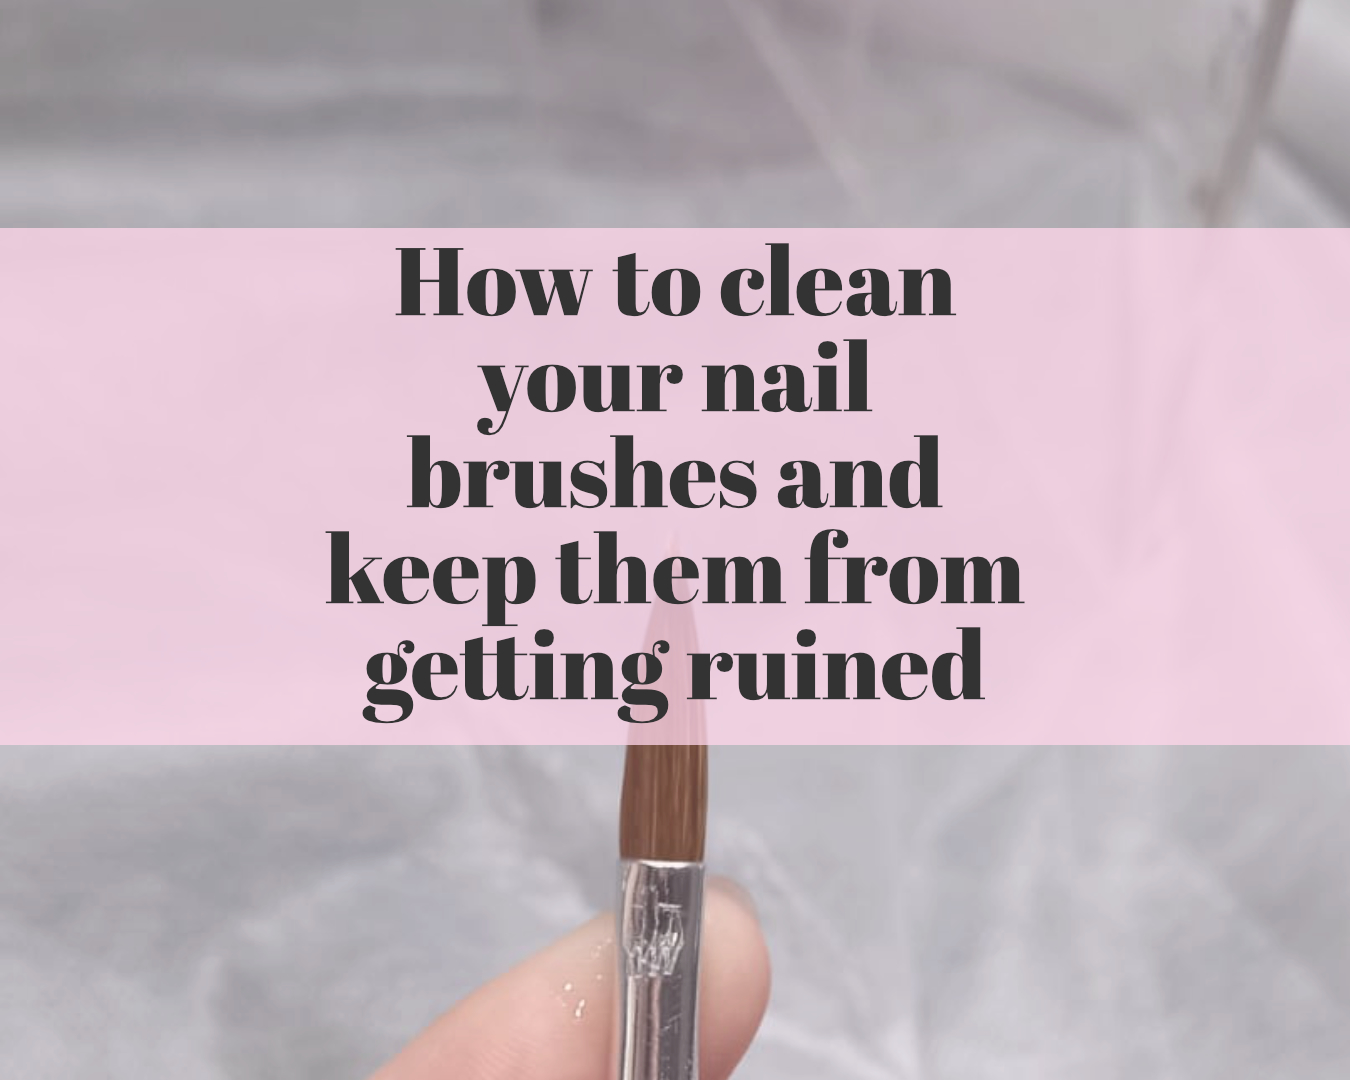 How to clean and prevent your nail brushes from getting ruined